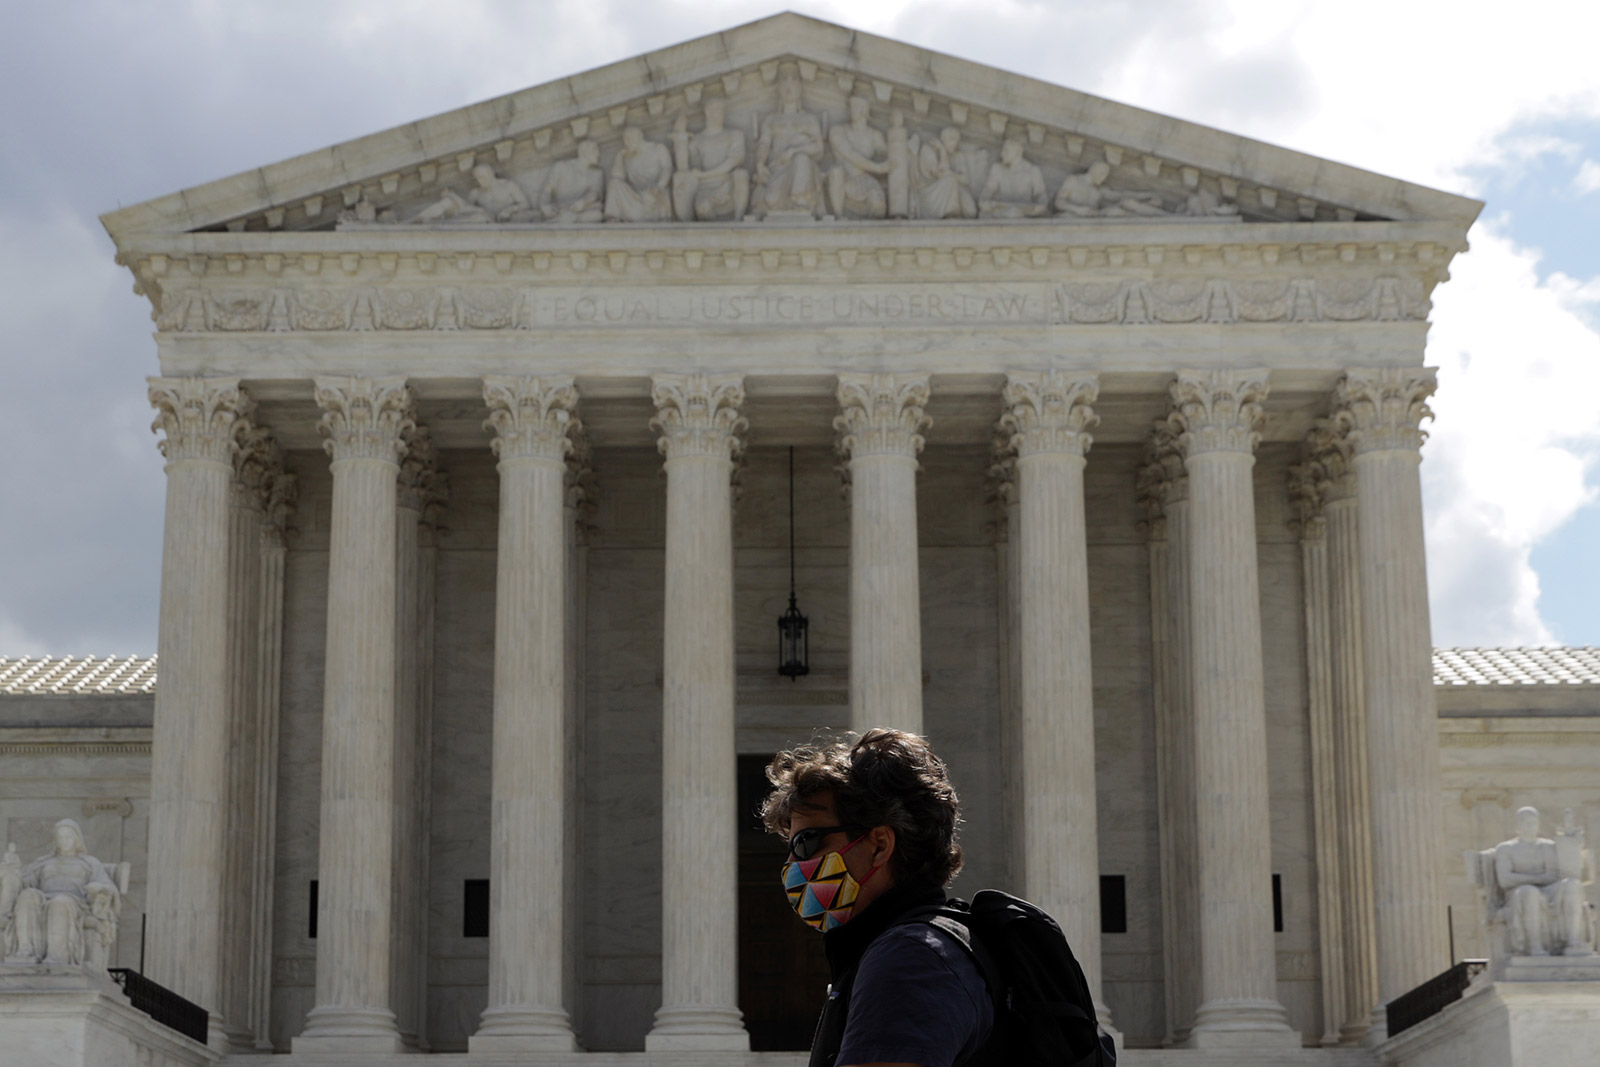  A pedestrian walks in front of the Supreme Court building on Tuesday.